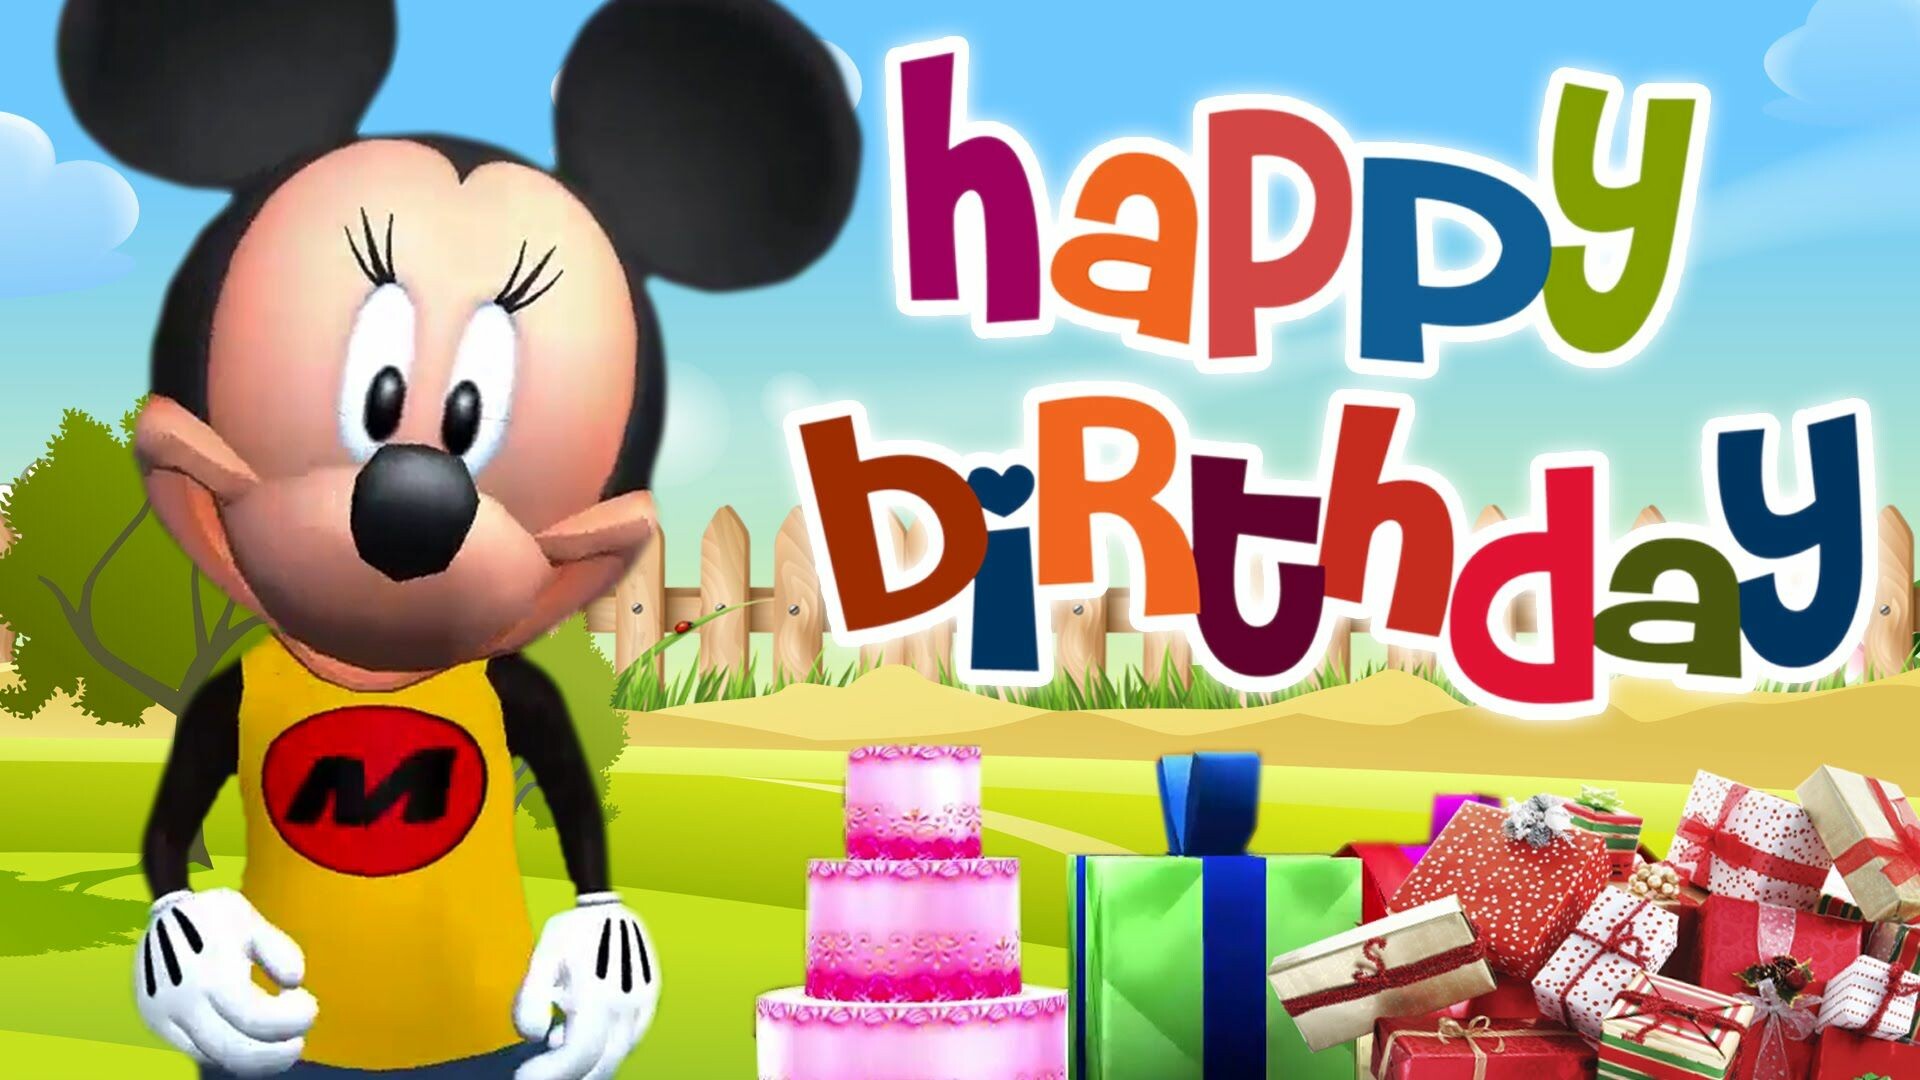 43+ Cute Birthday Cartoon Wallpapers: HD, 4K, 5K for PC and Mobile |  Download free images for iPhone, Android